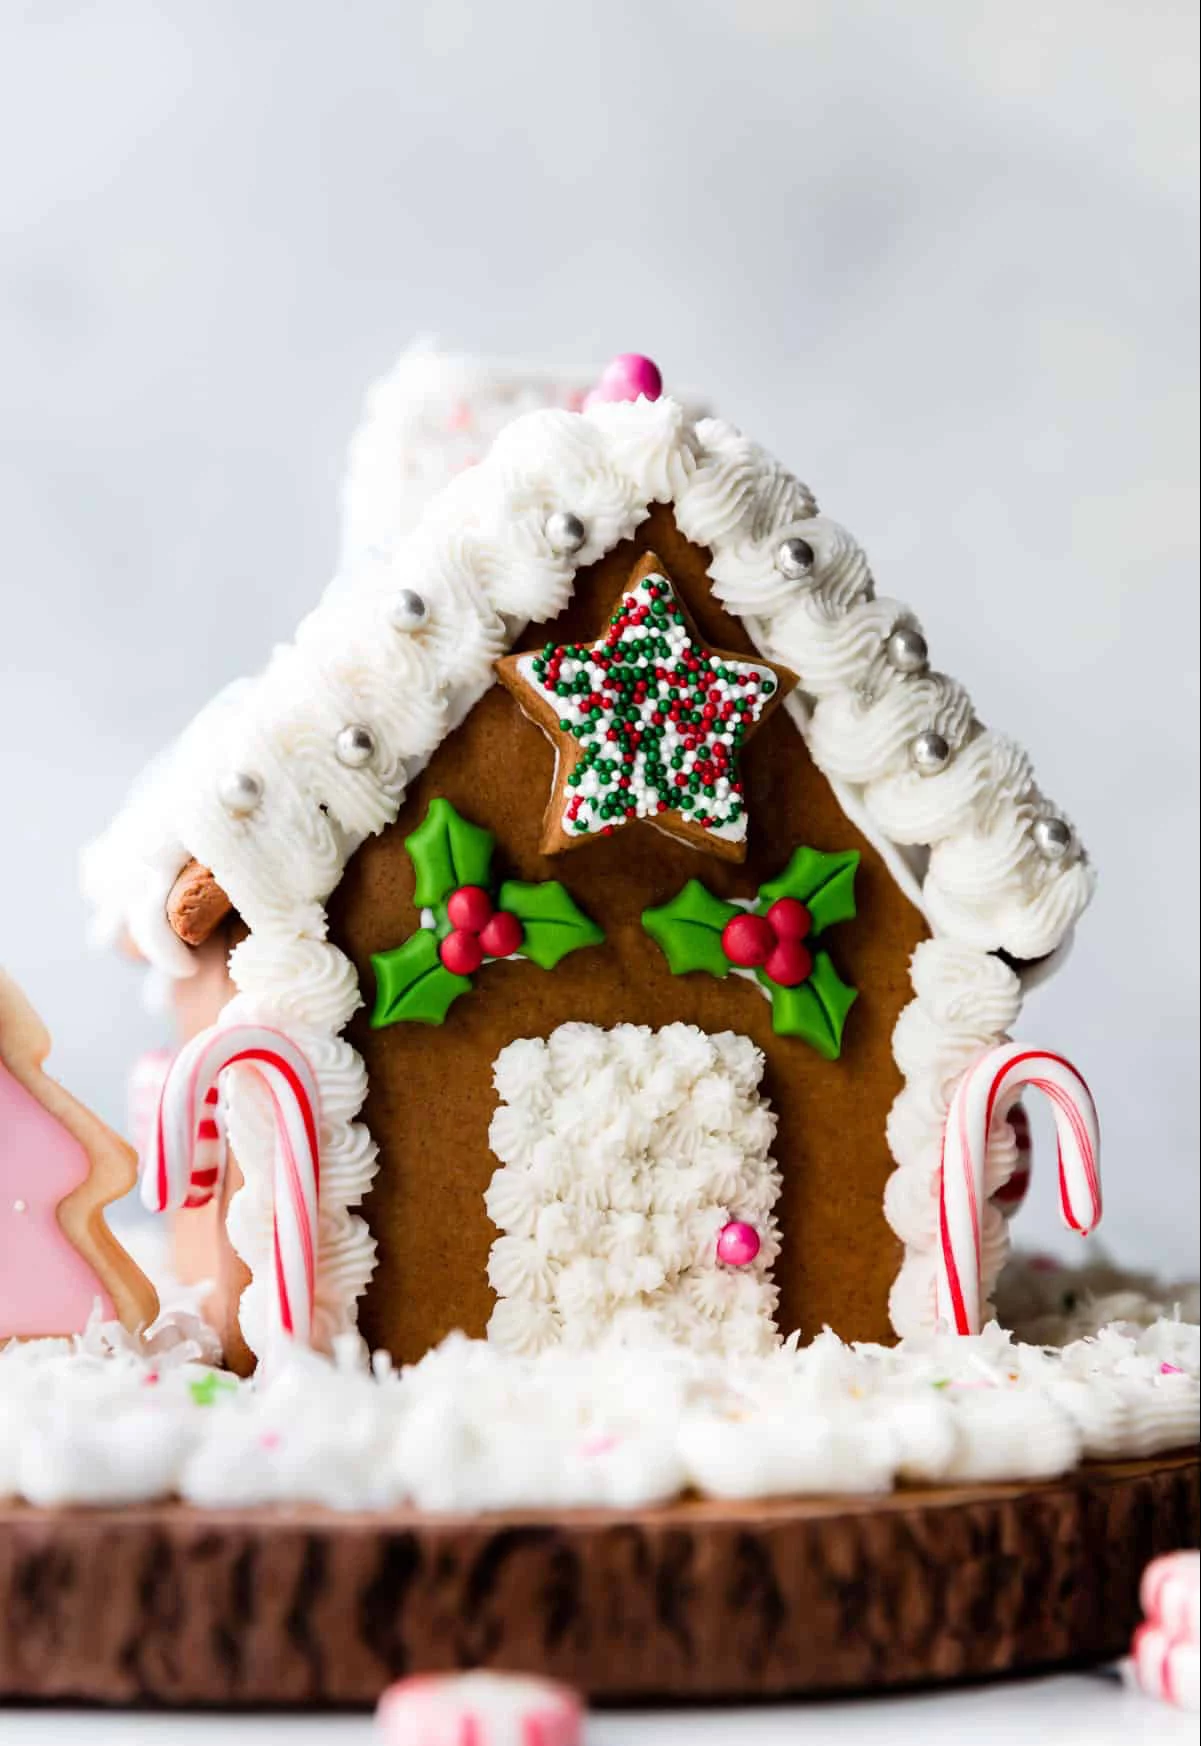 best icing for gingerbread house